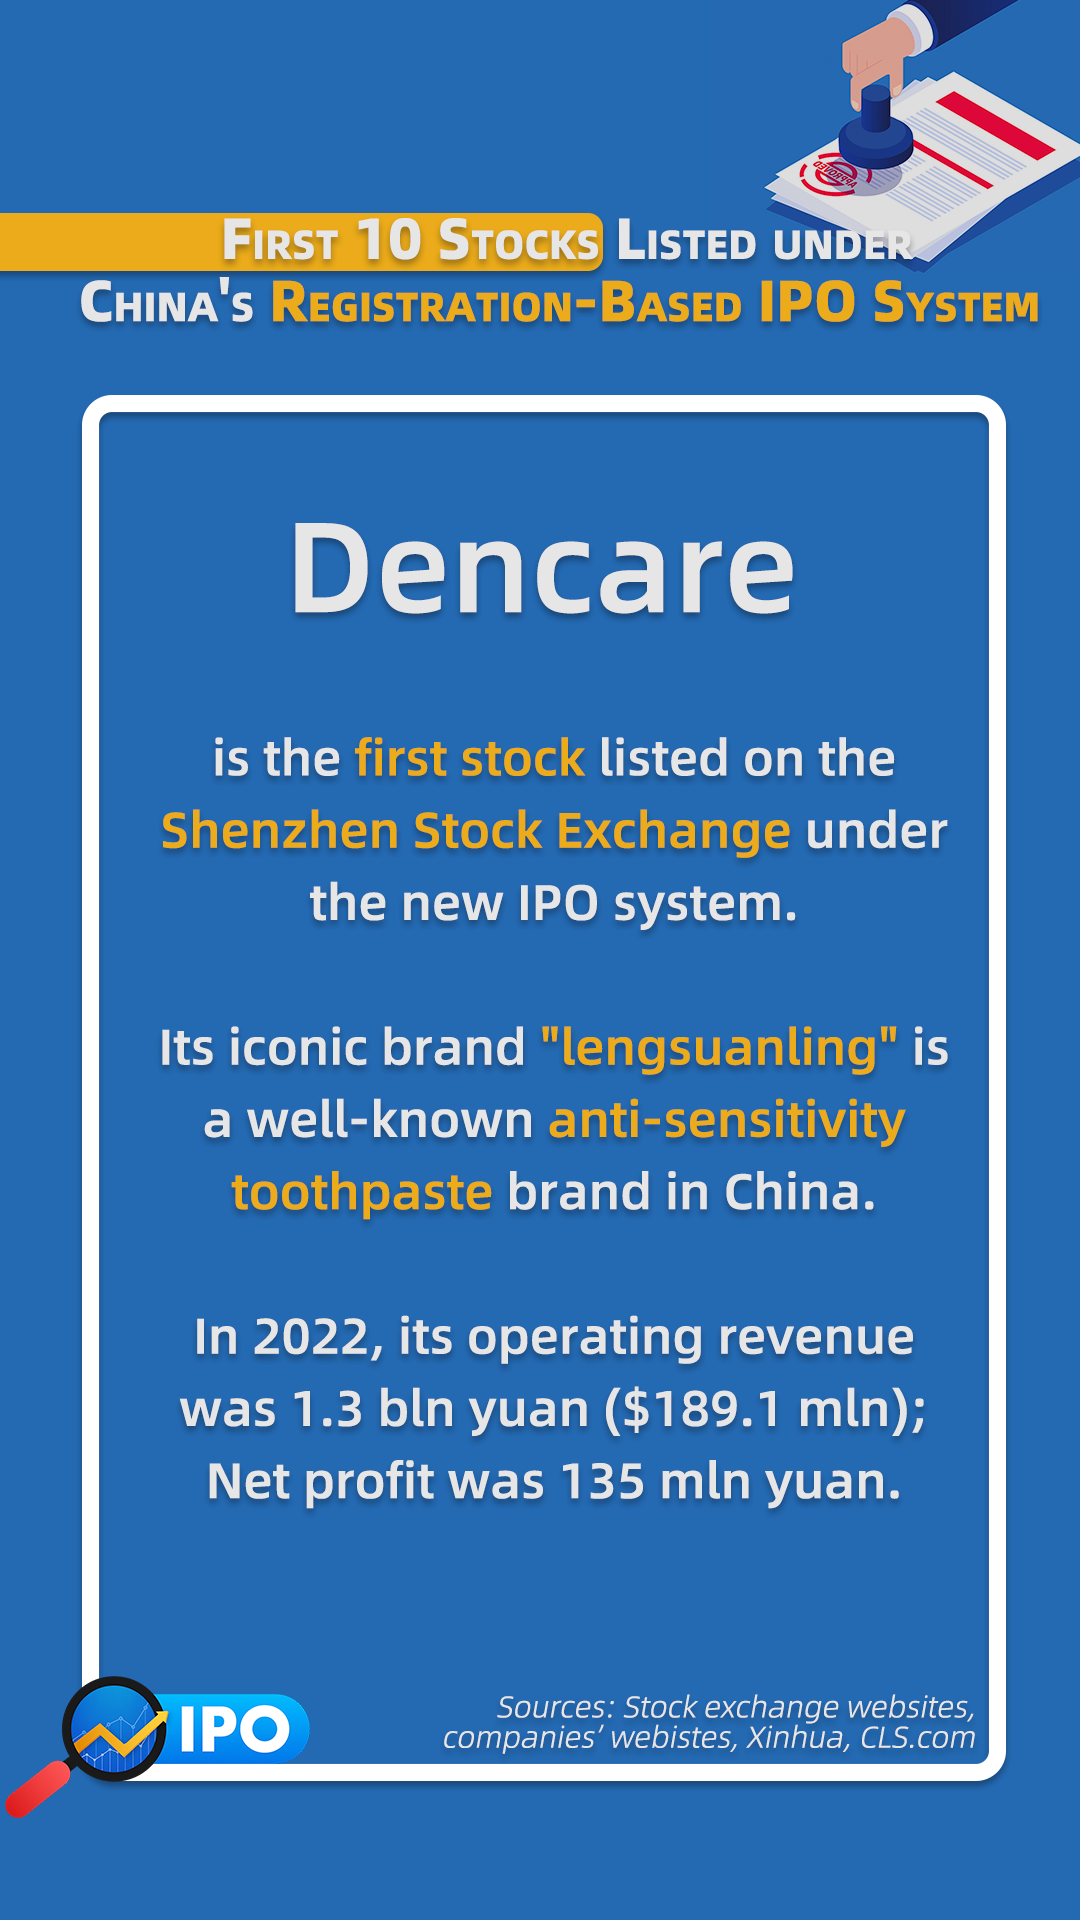 Dencare, one of the 10 listed companies